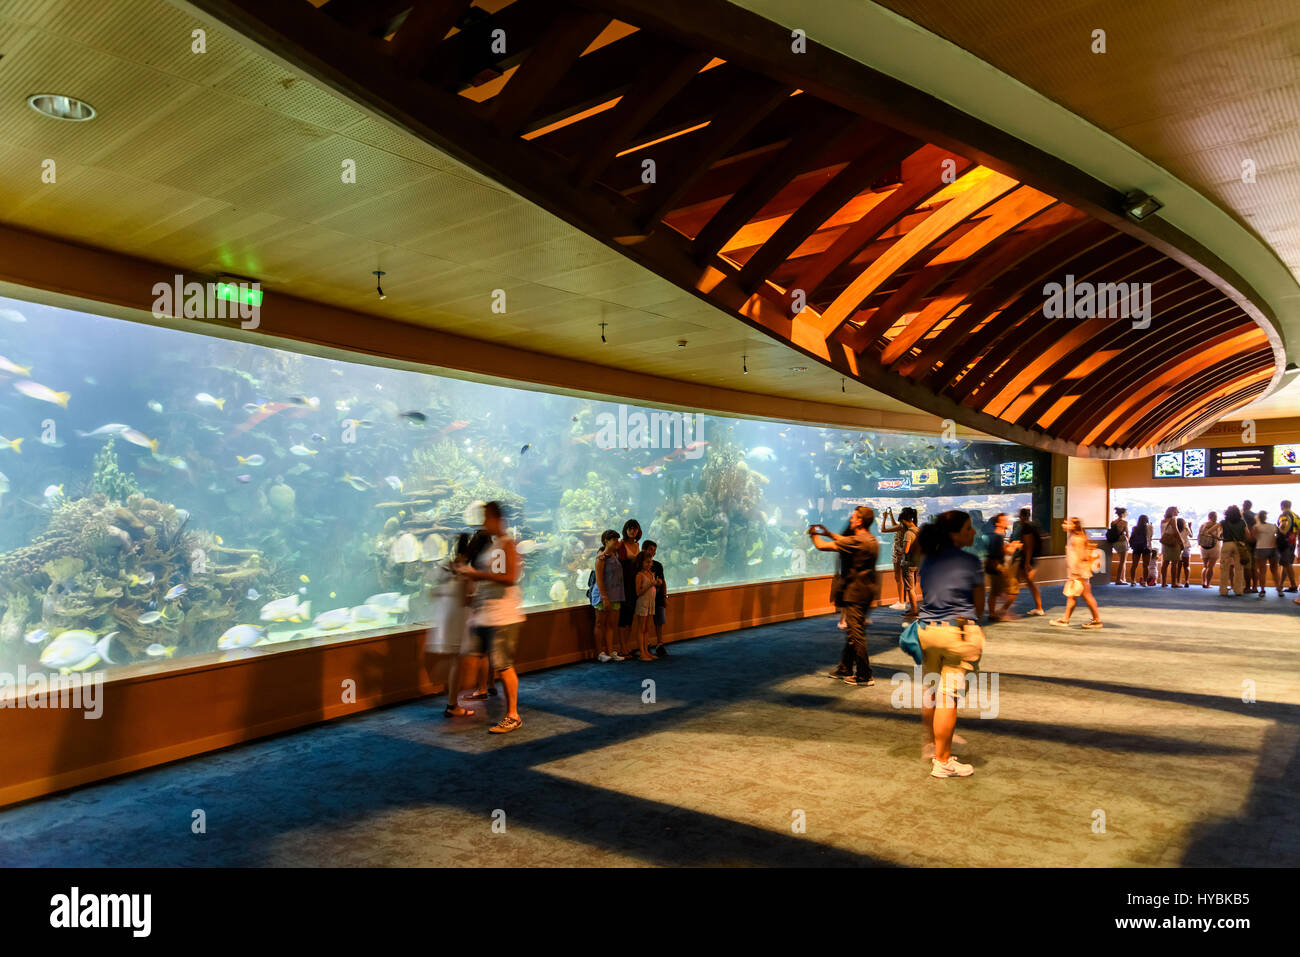 VALENCIA, SPAIN - JULY 29, 2016: L'Oceanografic (The Oceanographic) is an oceanarium situated in the east of the city of Valencia, where are represent Stock Photo